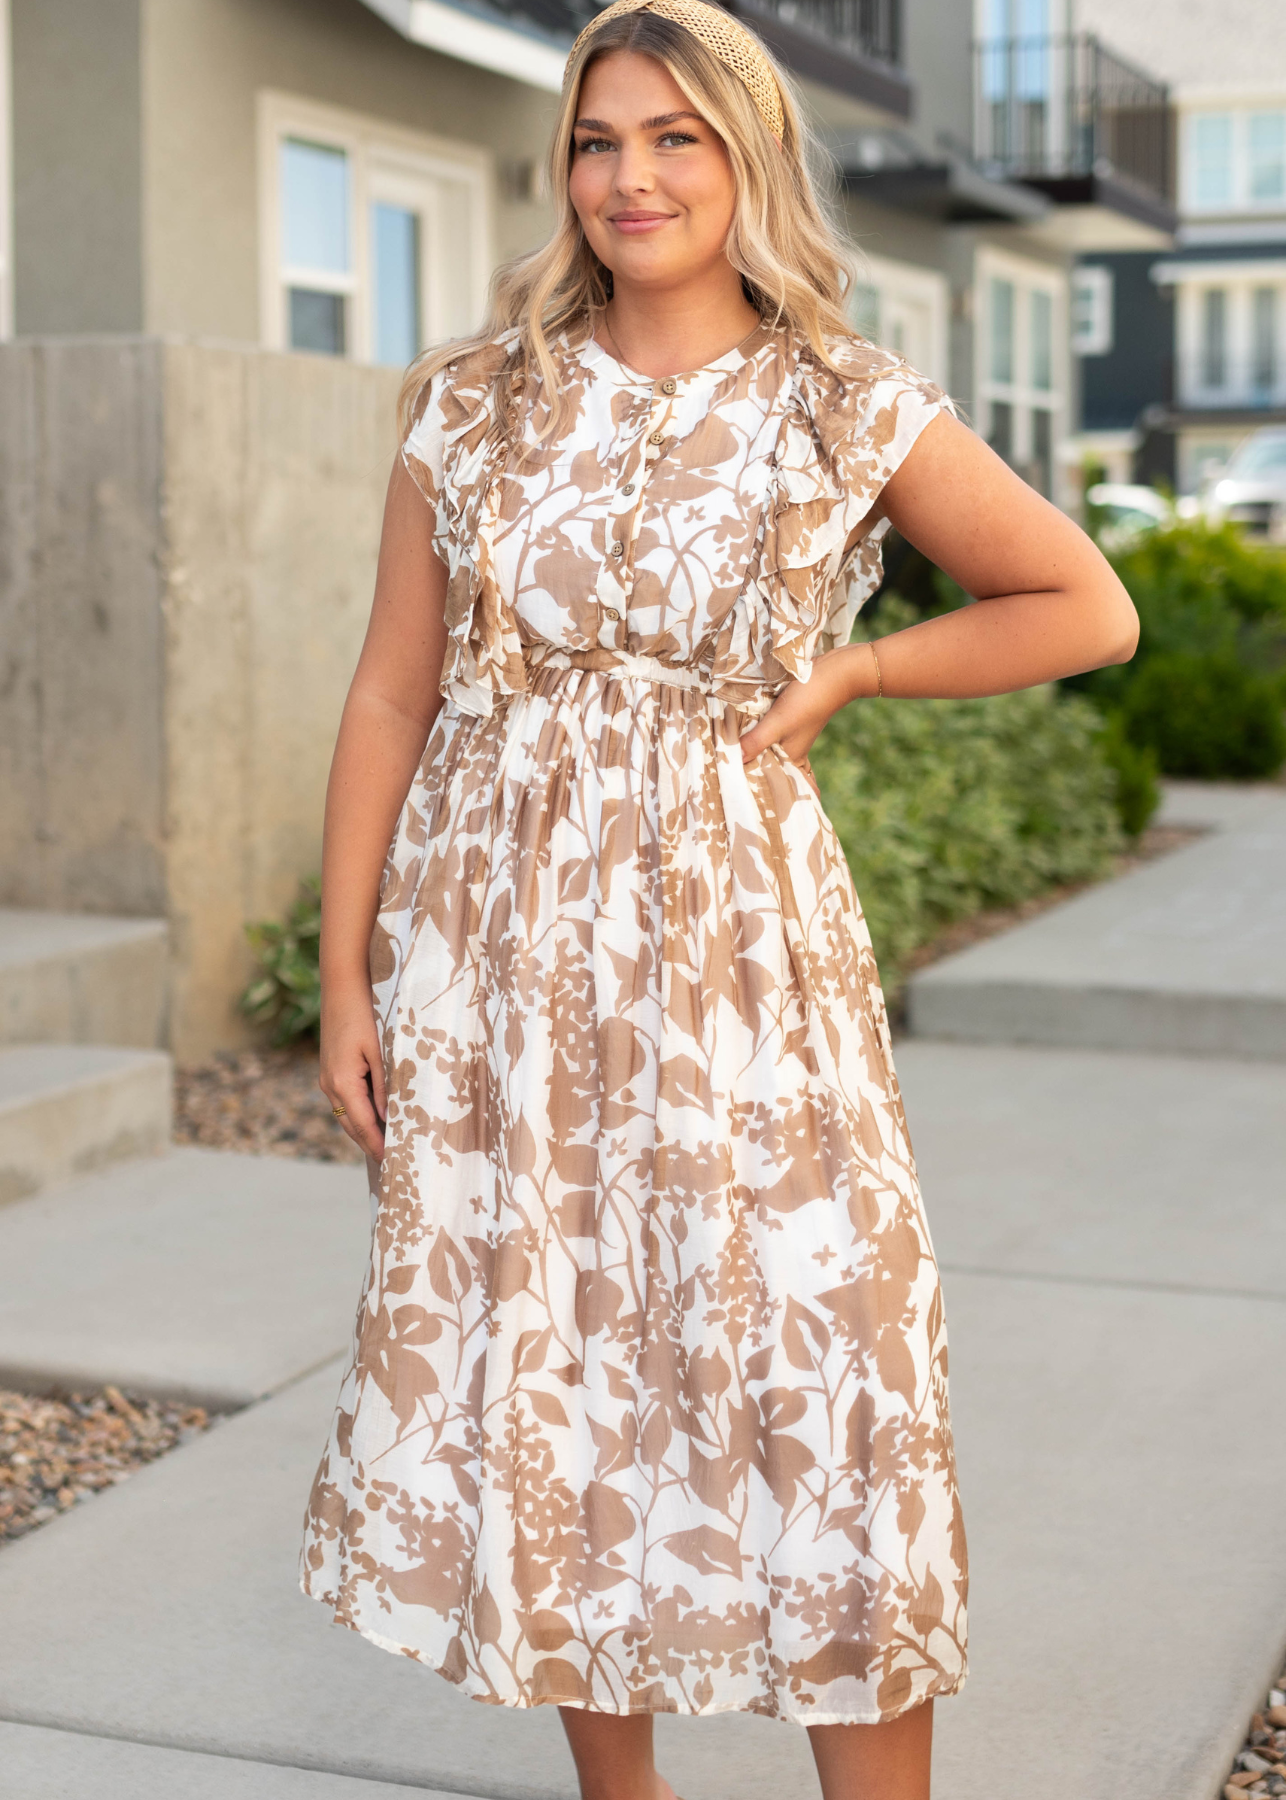 Beige dress with short ruffle sleeves